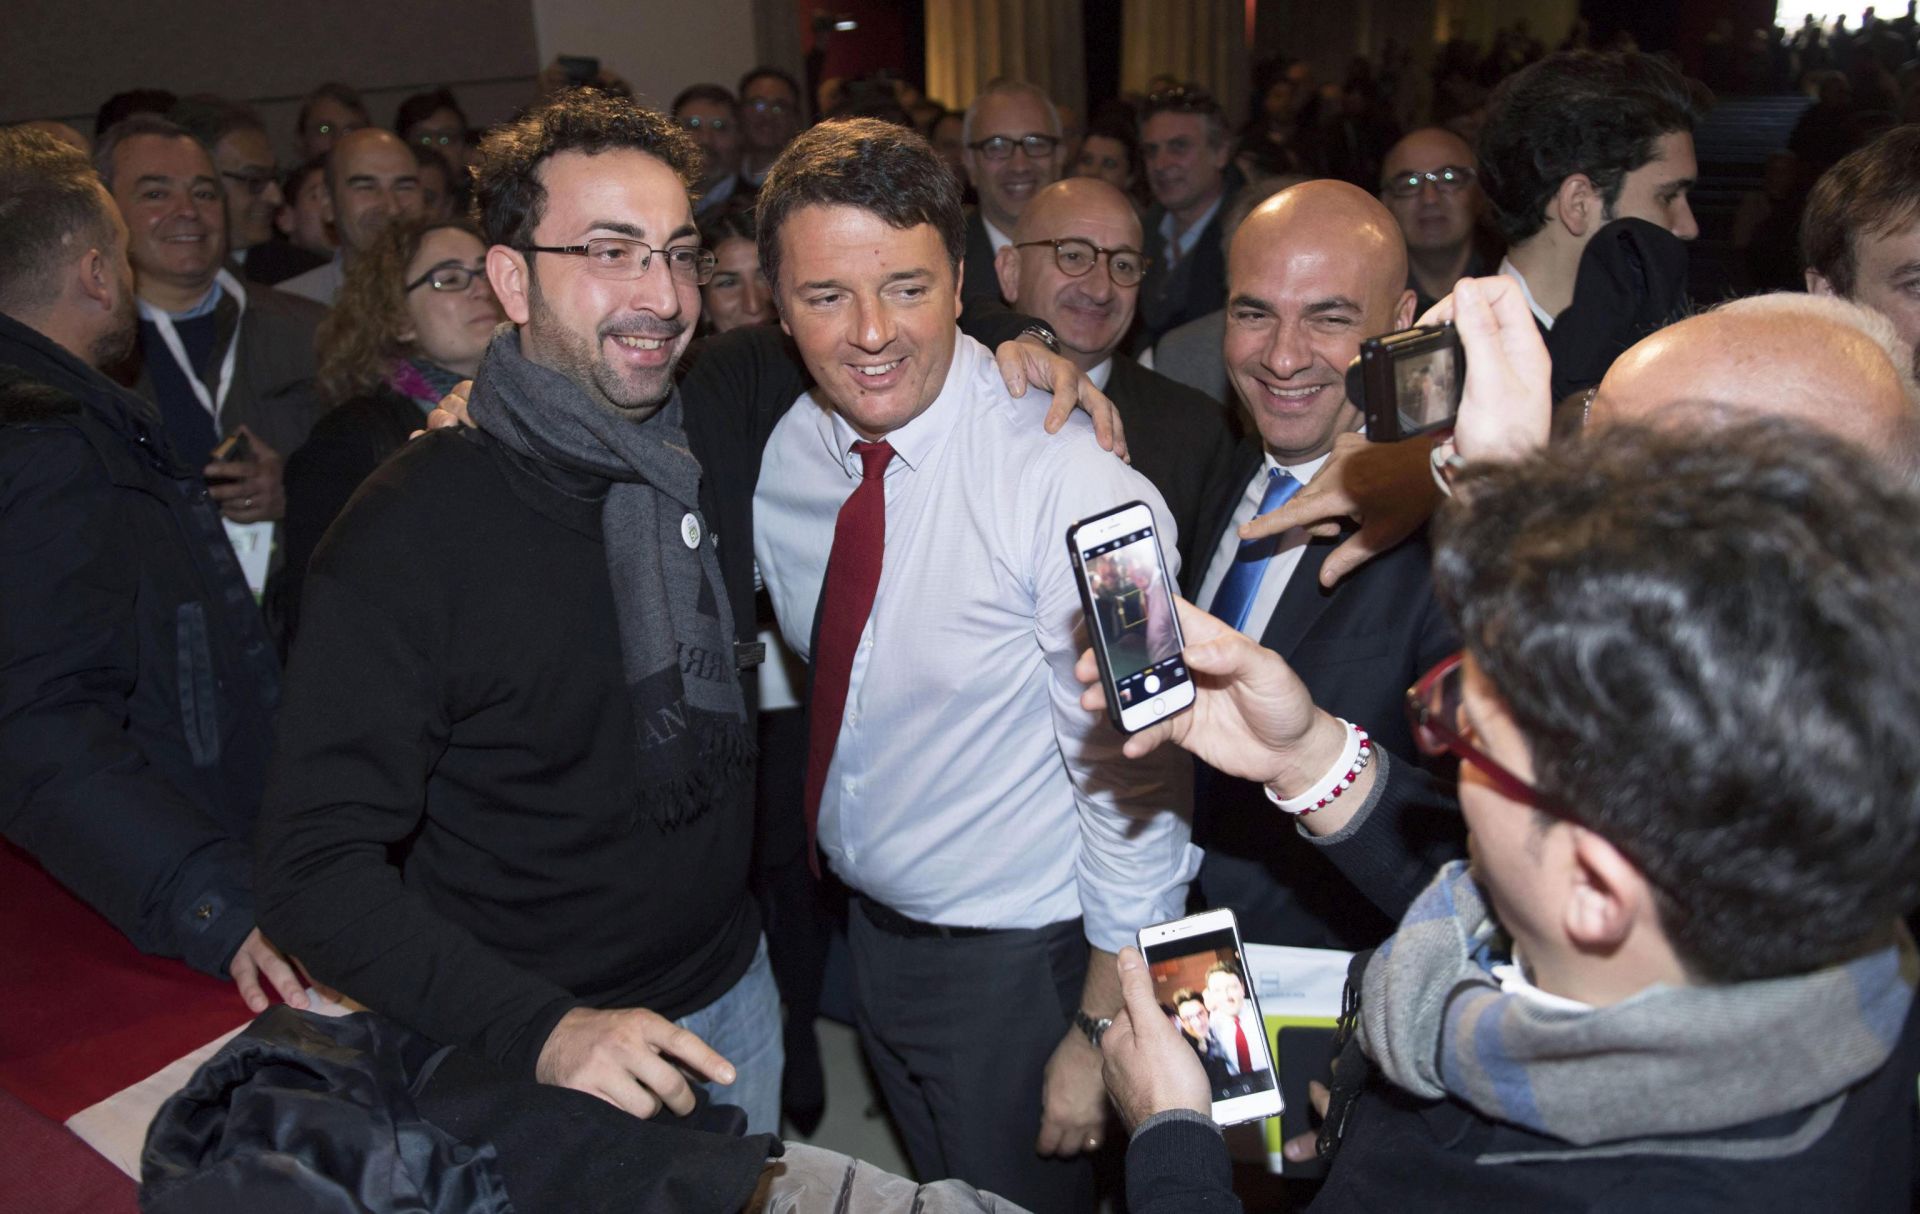 epa05637912 Italian Prime Minister Matteo Renzi is photographed with members of the audience during the meeting in the municipal Cinema of Matera, in Matera, Italy, 19 November 2016. A constitutional referendum is planned to be held in Italy on 04 December 2016 asking voters if they wish to amend the Italian Constitution along with other parliamentary and regional reforms.  EPA/TIBERIO BARCHIELLI / CHIGI'S PALACE PRESS OFFICE / HANDOUT ANSA PROVIDES ACCESS TO THIS HANDOUT PHOTO TO BE USED SOLELY TO ILLUSTRATE NEWS REPORTING OR COMMENTARY ON THE FACTS OR EVENTS DEPICTED IN THIS IMAGE; NO ARCHIVING; NO LICENSING HANDOUT EDITORIAL USE ONLY/NO SALES/NO ARCHIVES